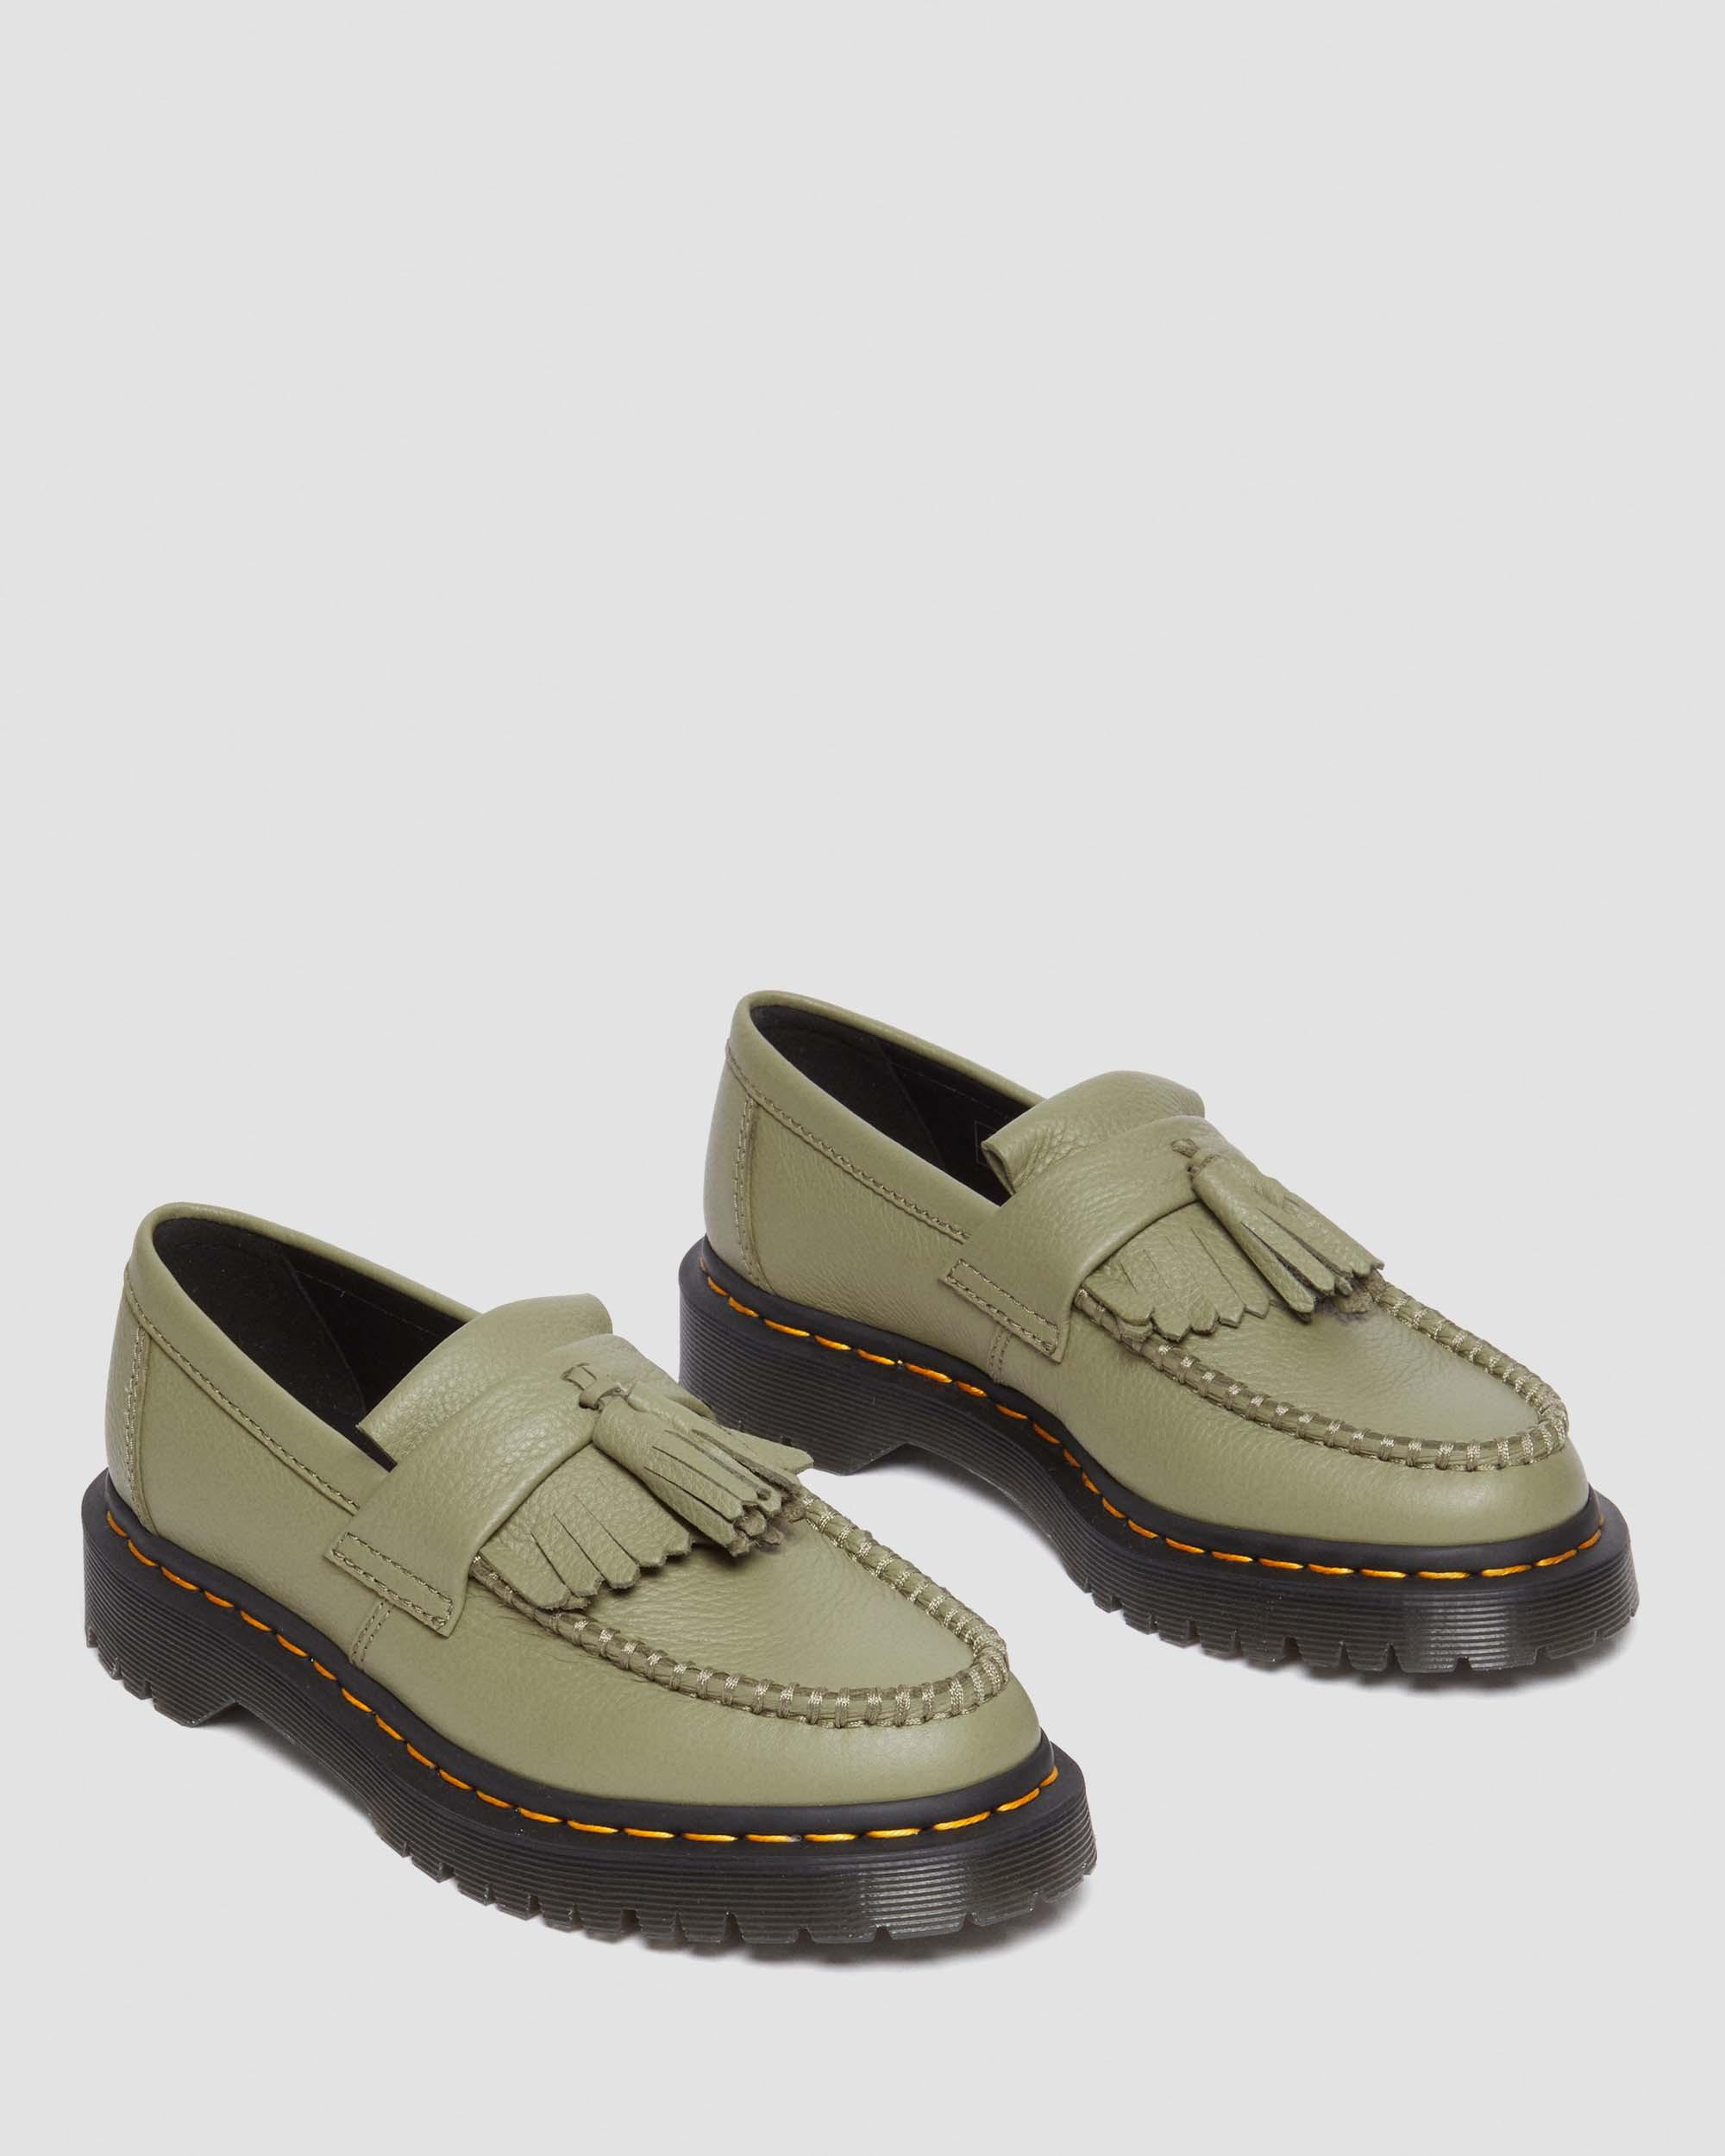 Adrian Virginia Leather Tassel Loafers in Muted Olive